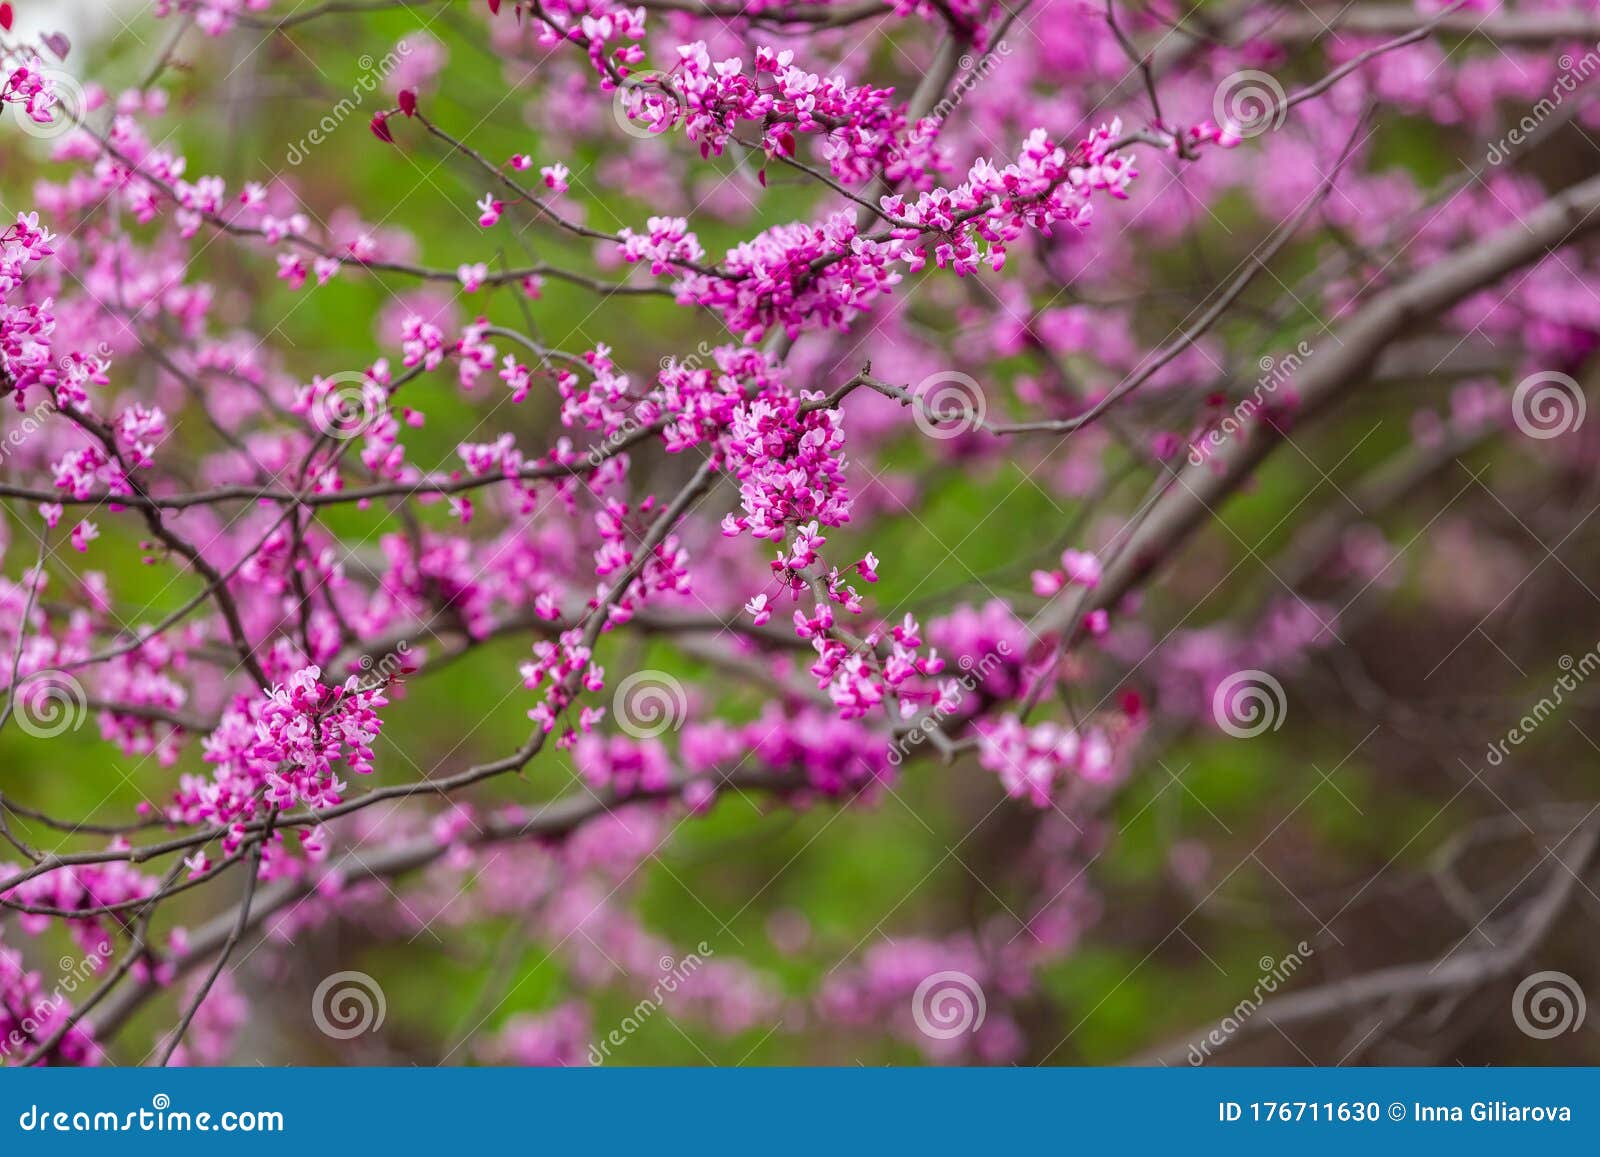 purple flowers of cercis canadensis